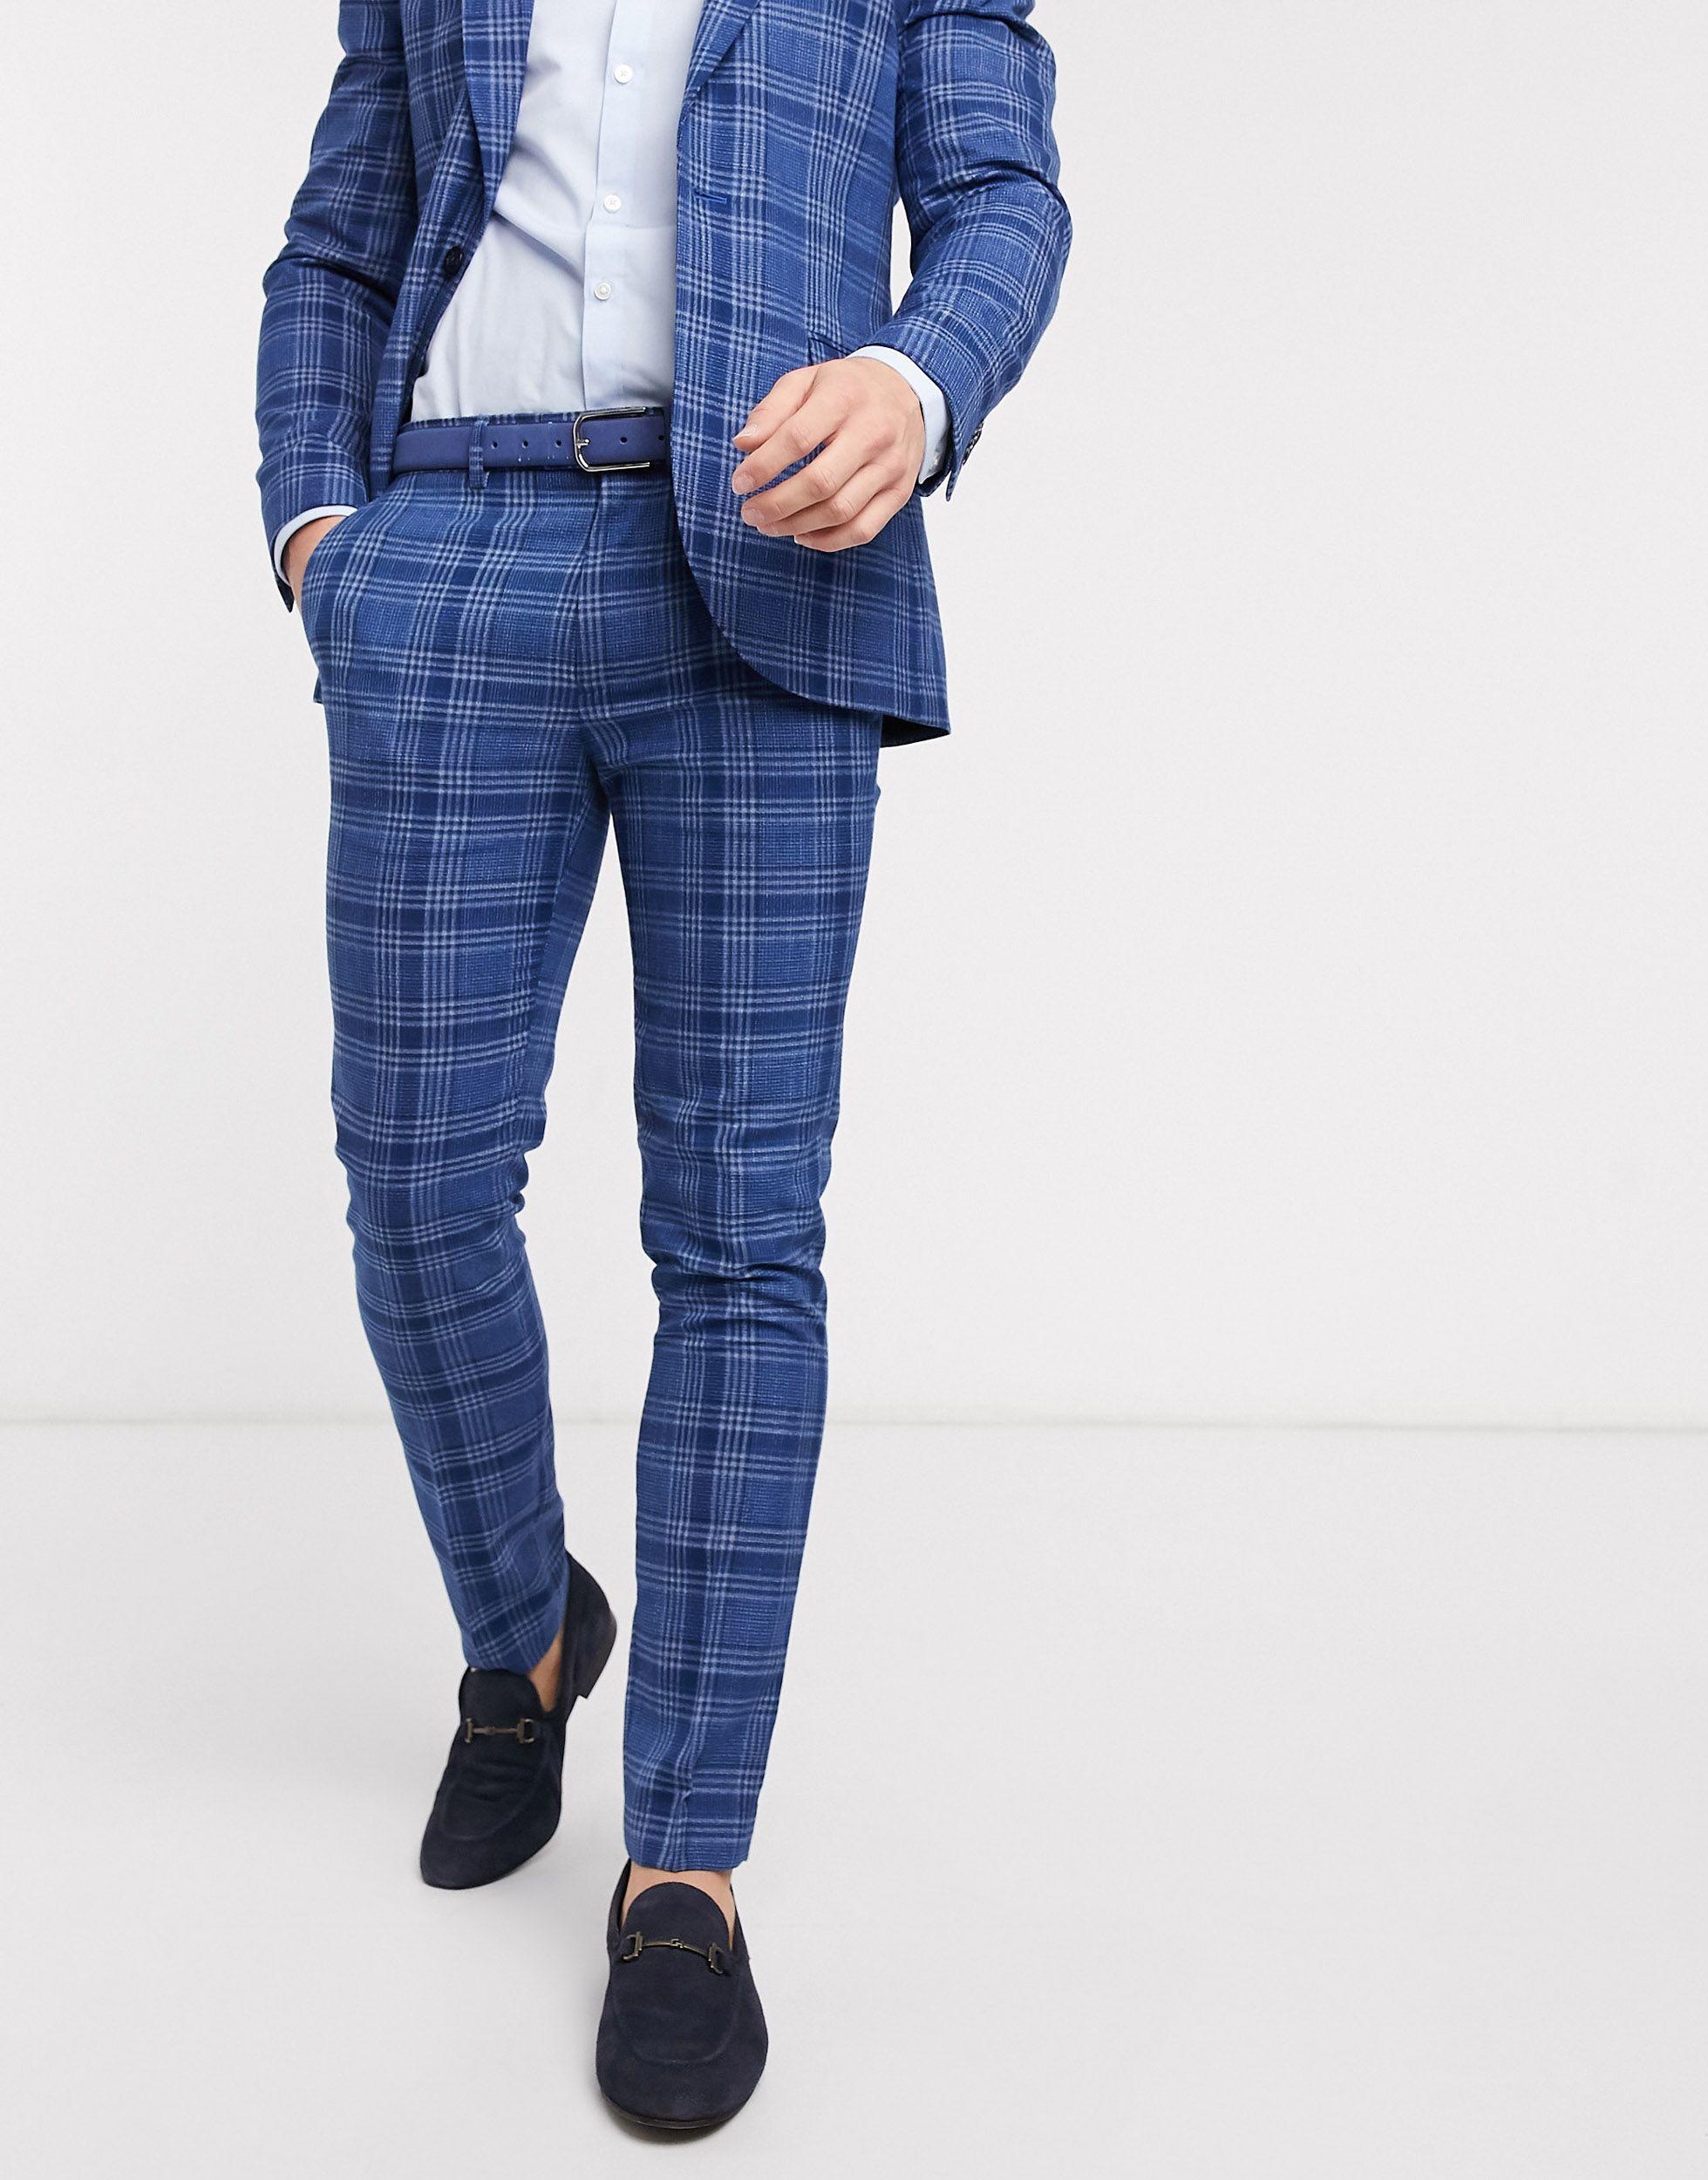 TOPMAN Skinny Fit Checked Suit Jacket in Blue for Men | Lyst